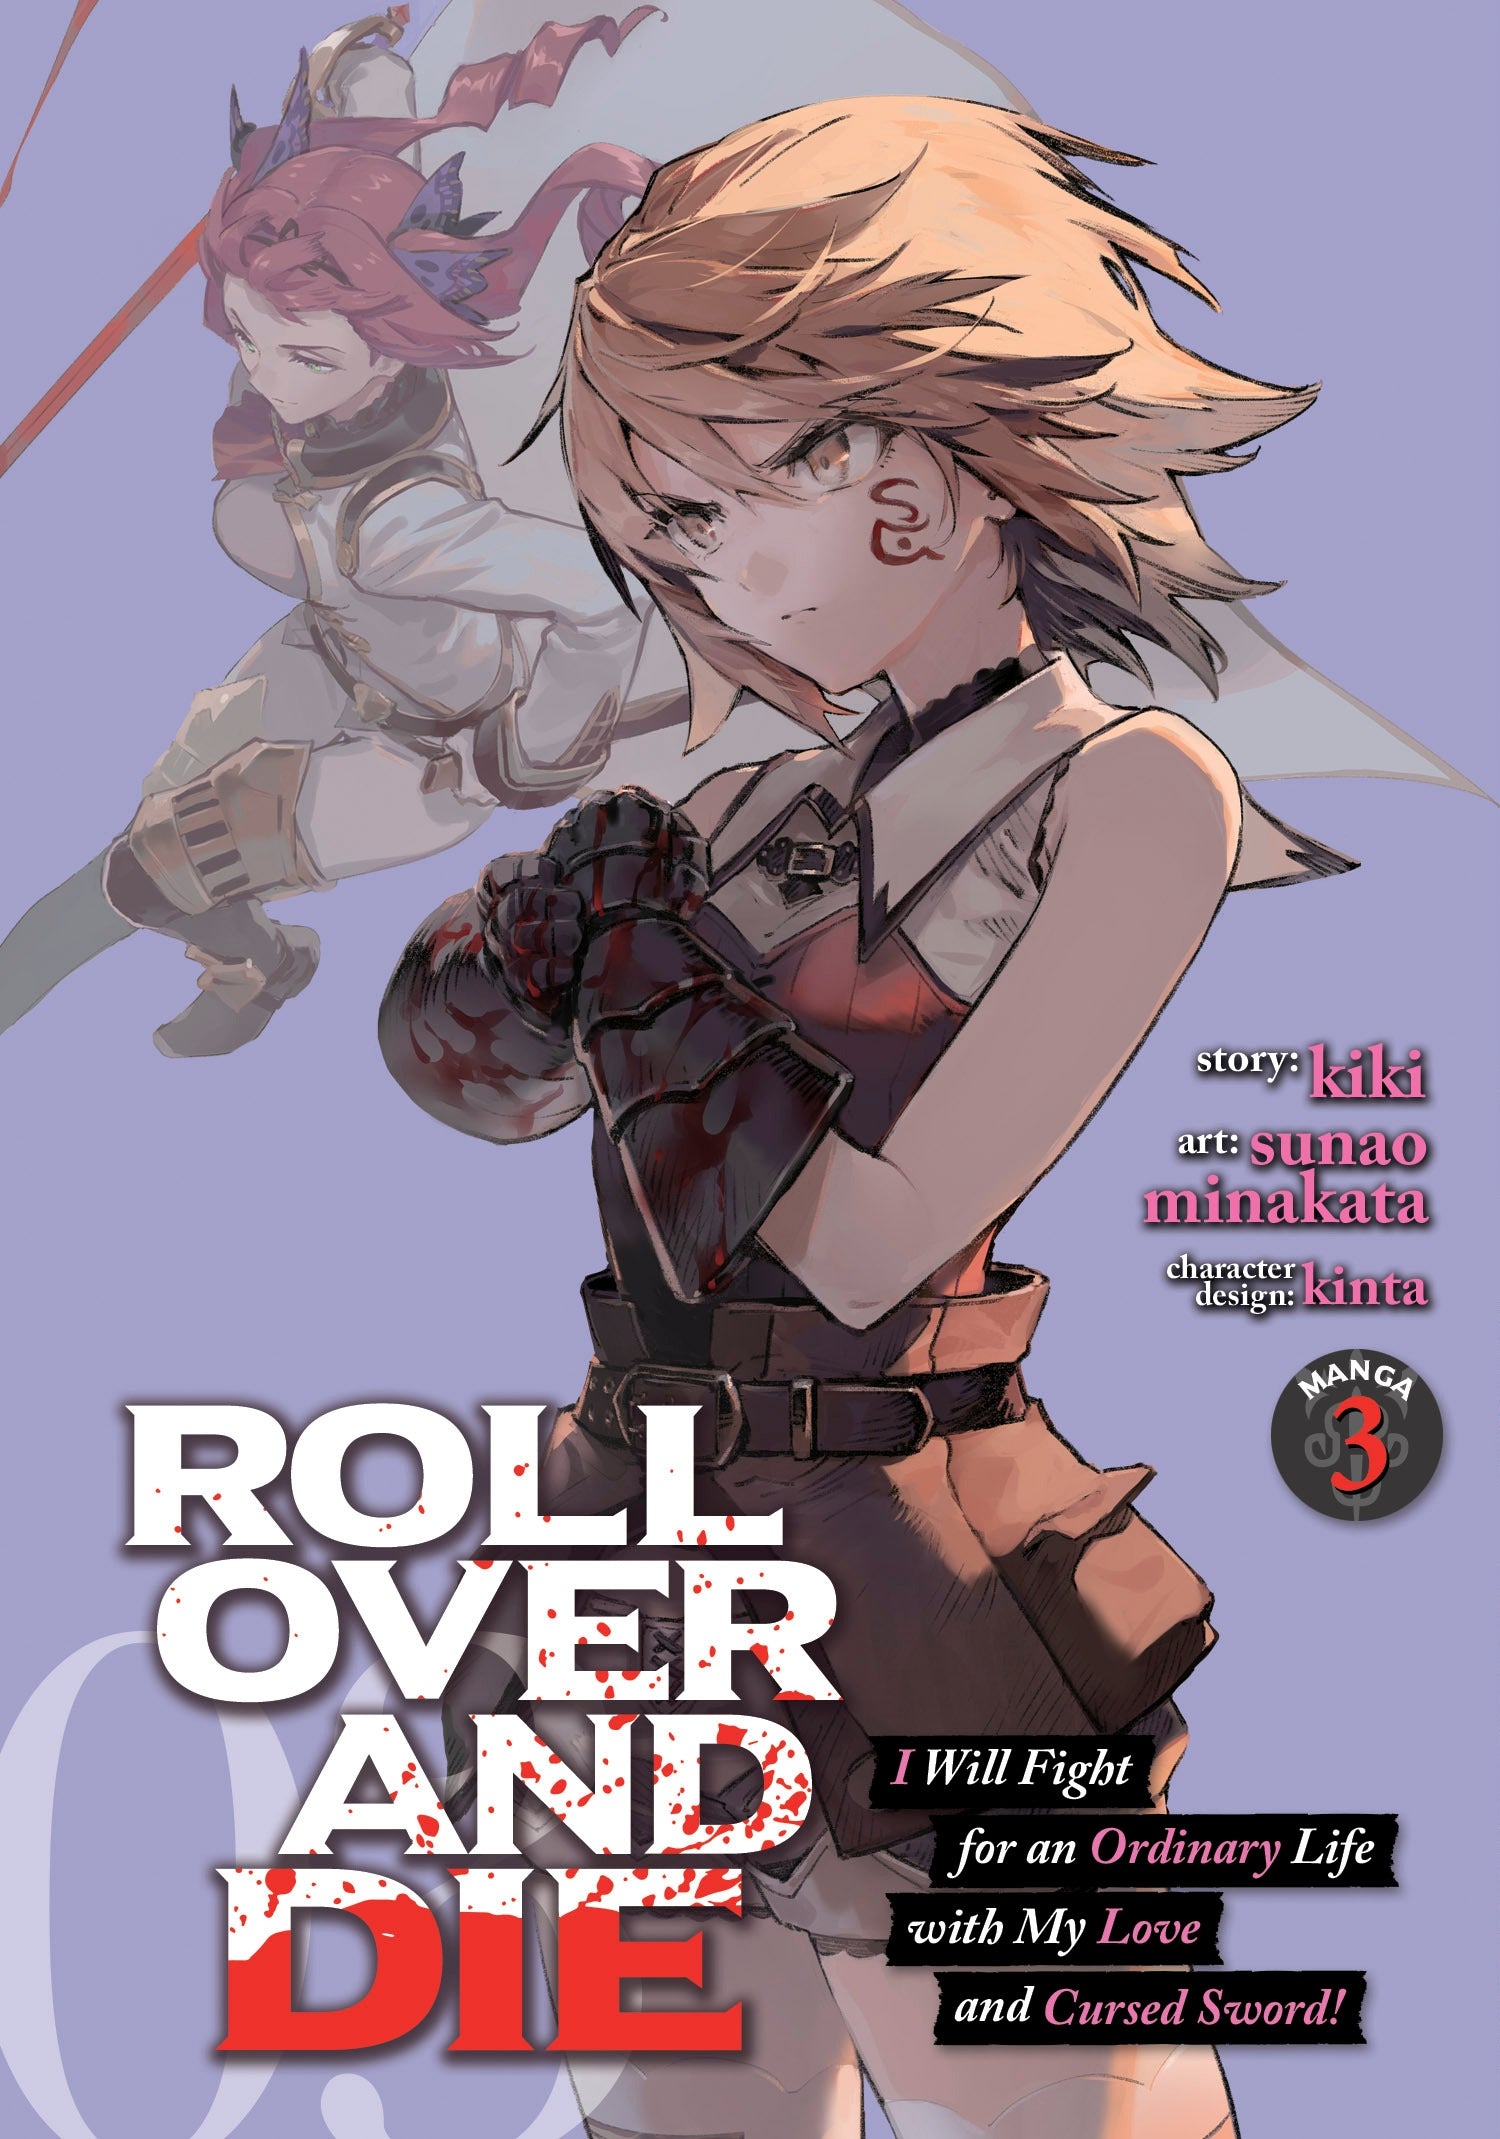 ROLL OVER AND DIE I Will Fight for an Ordinary Life with My Love and Cursed Sword! (Manga) - Vol. 3